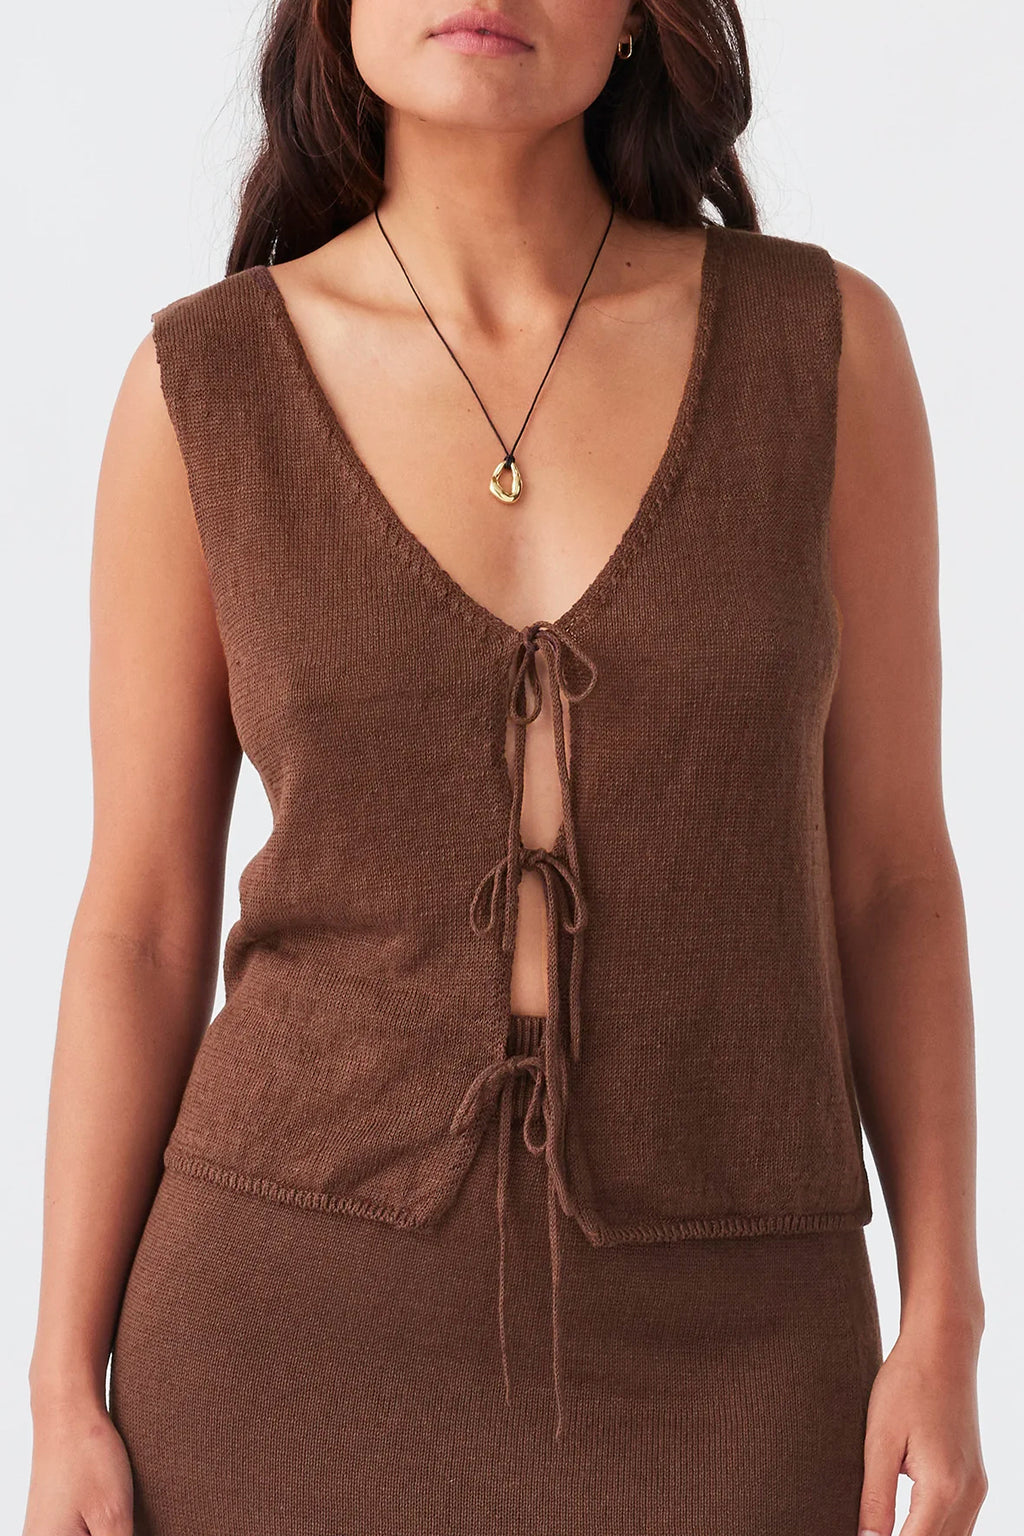 Pearla Knit Top - Chocolate